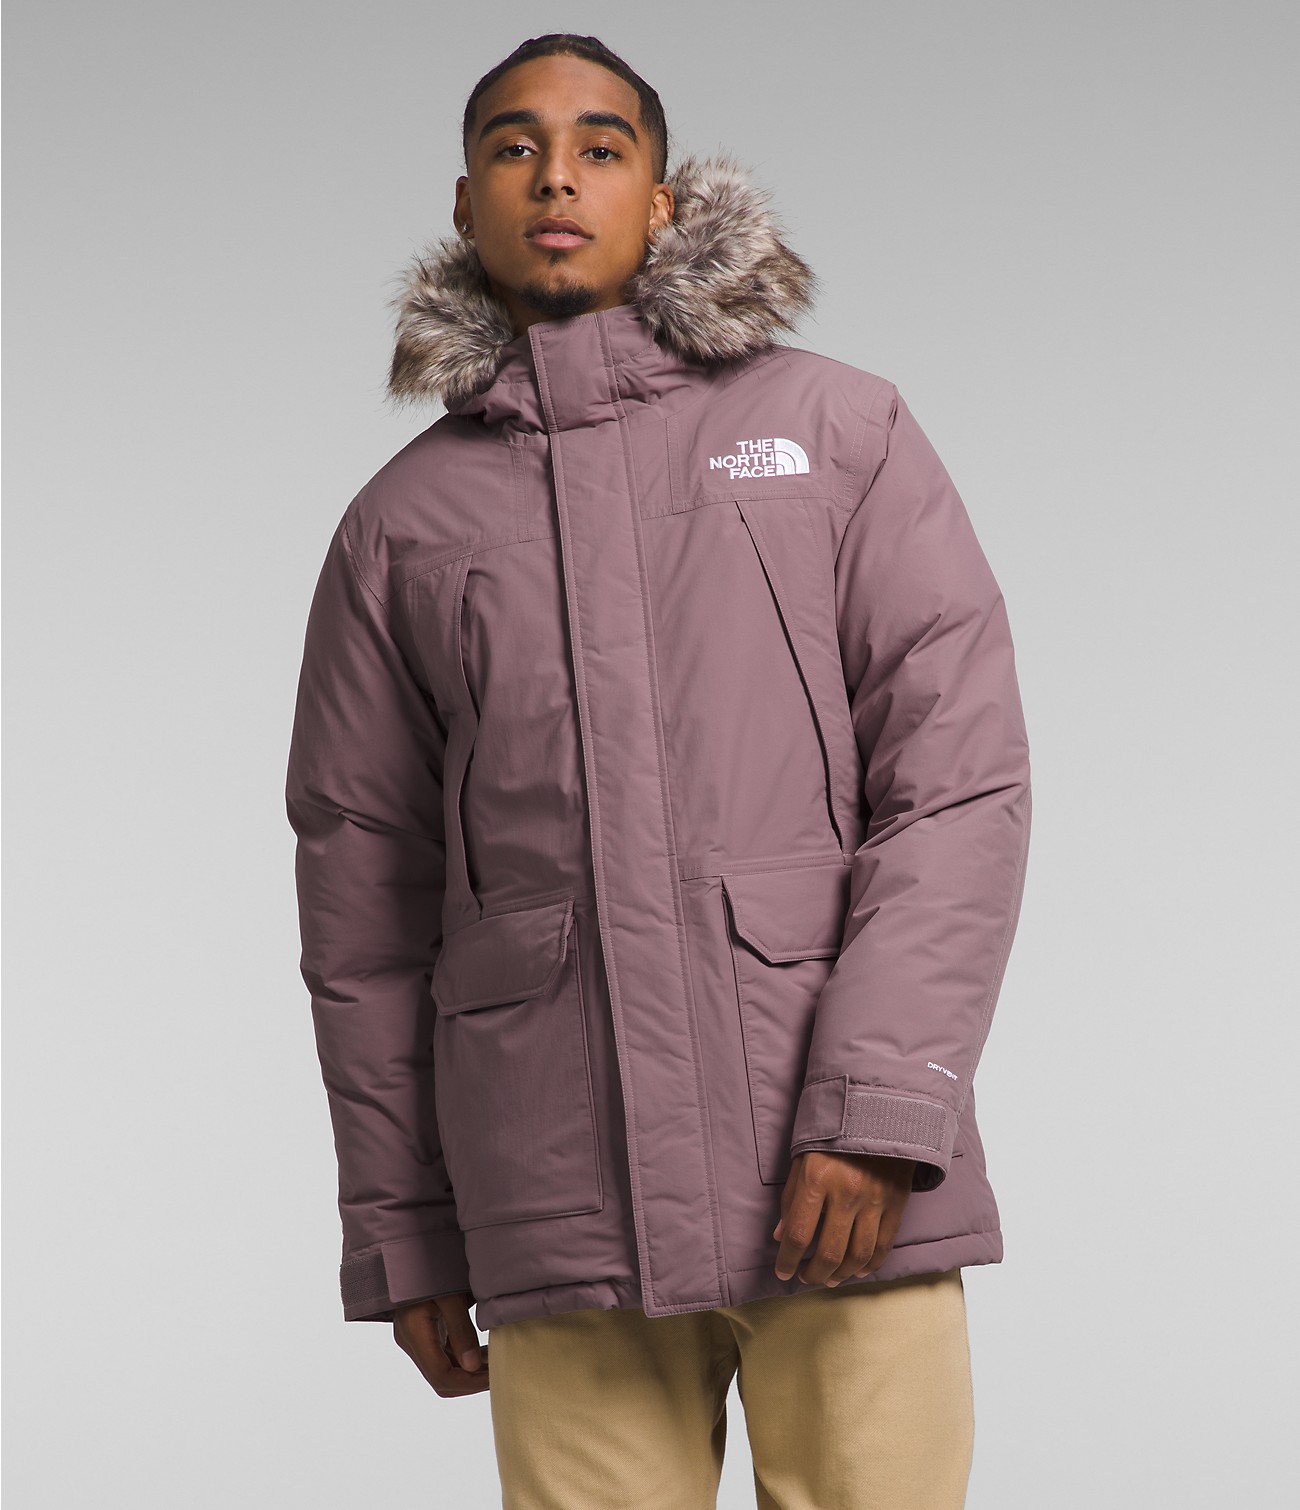 Unlock Wilderness' choice in the Lands' End Vs North Face comparison, the McMurdo Parka by The North Face